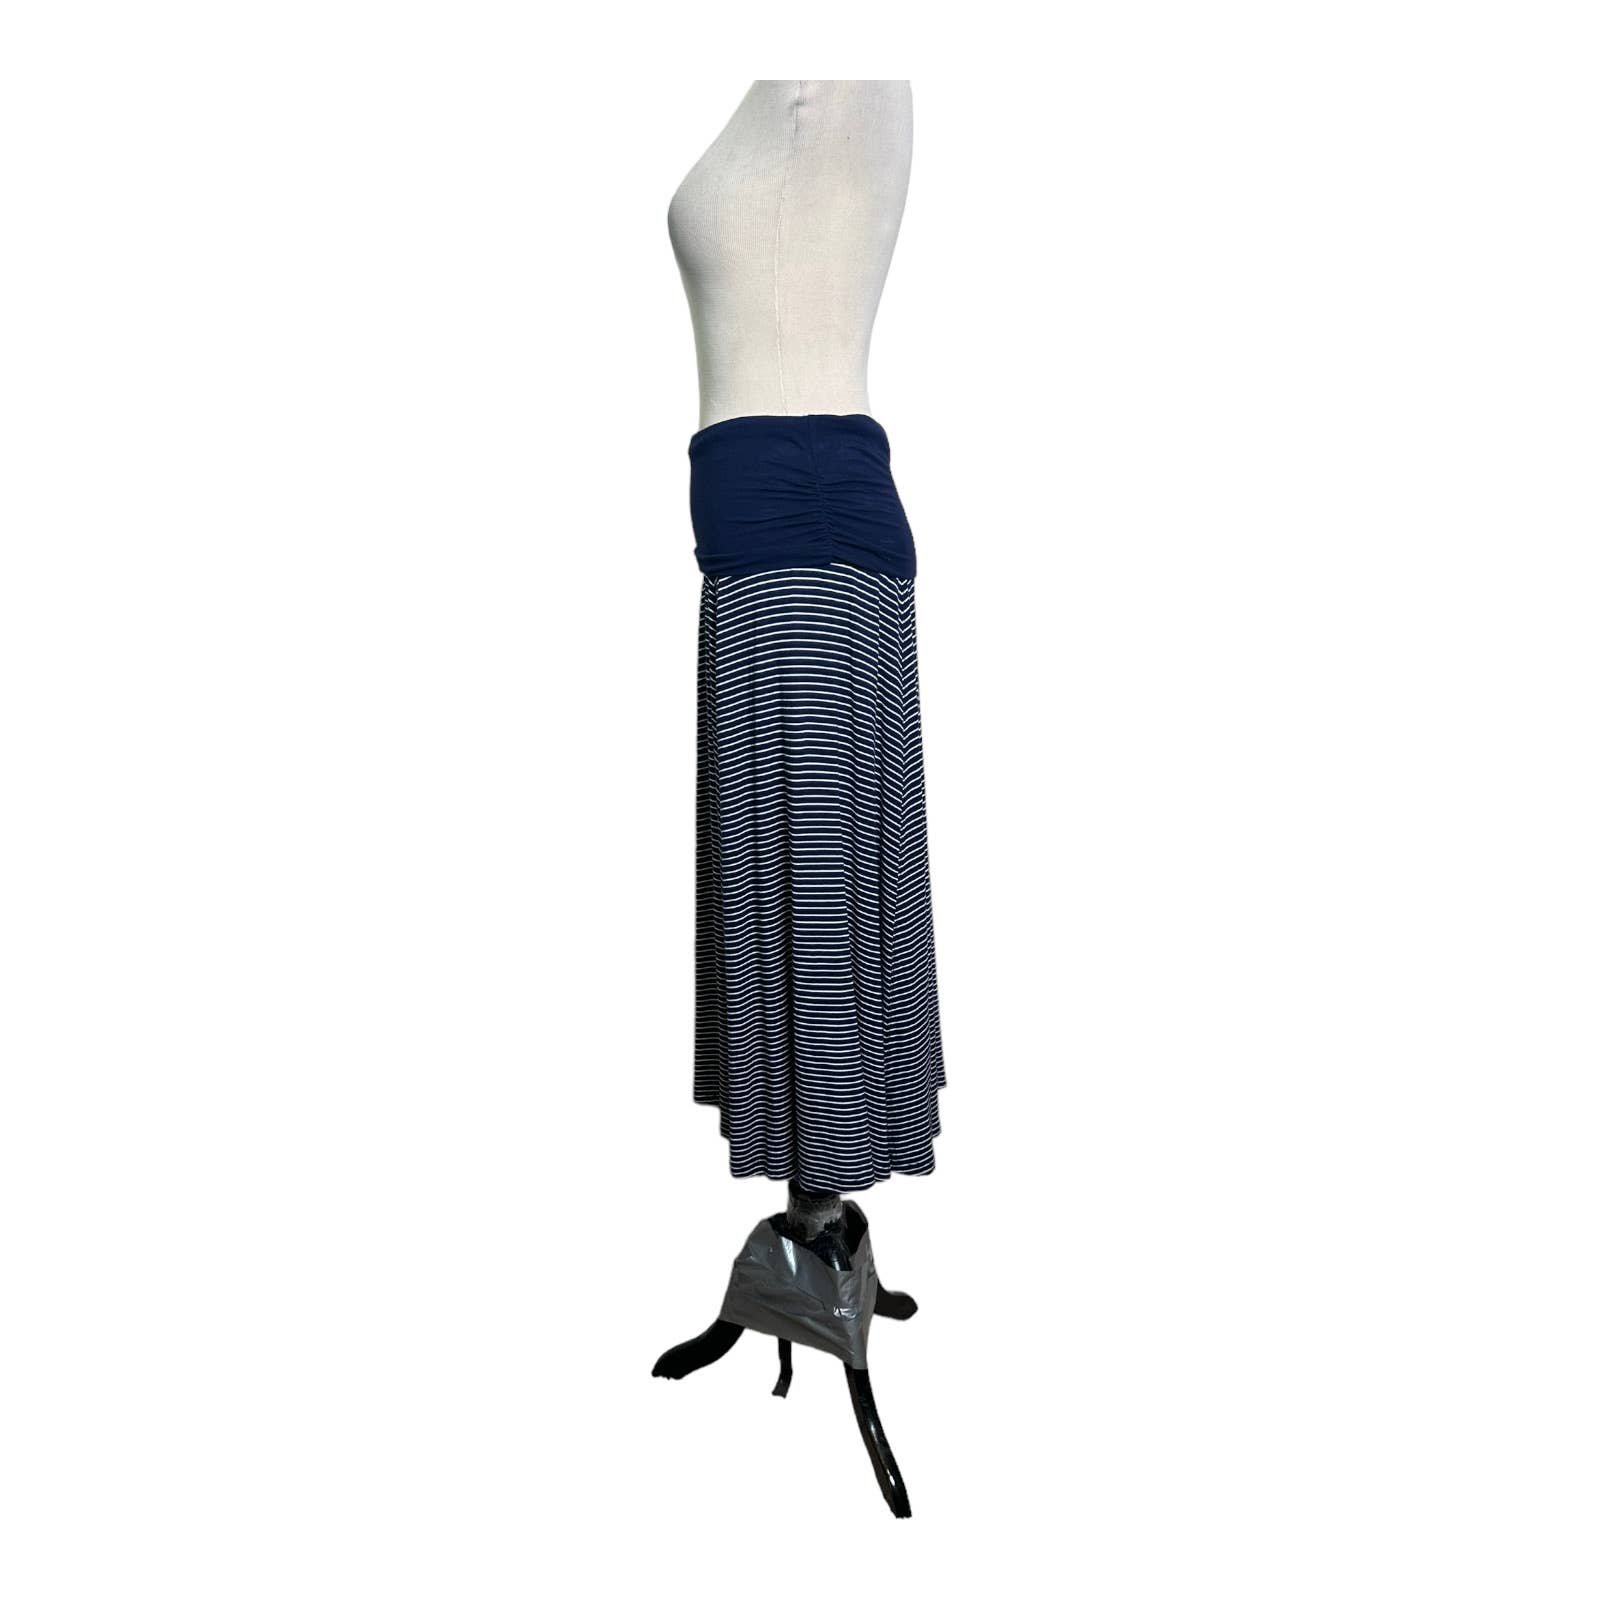 reasonable price Gap blue striped pull on maxi skirt size XS LOxyOW32g Factory Price